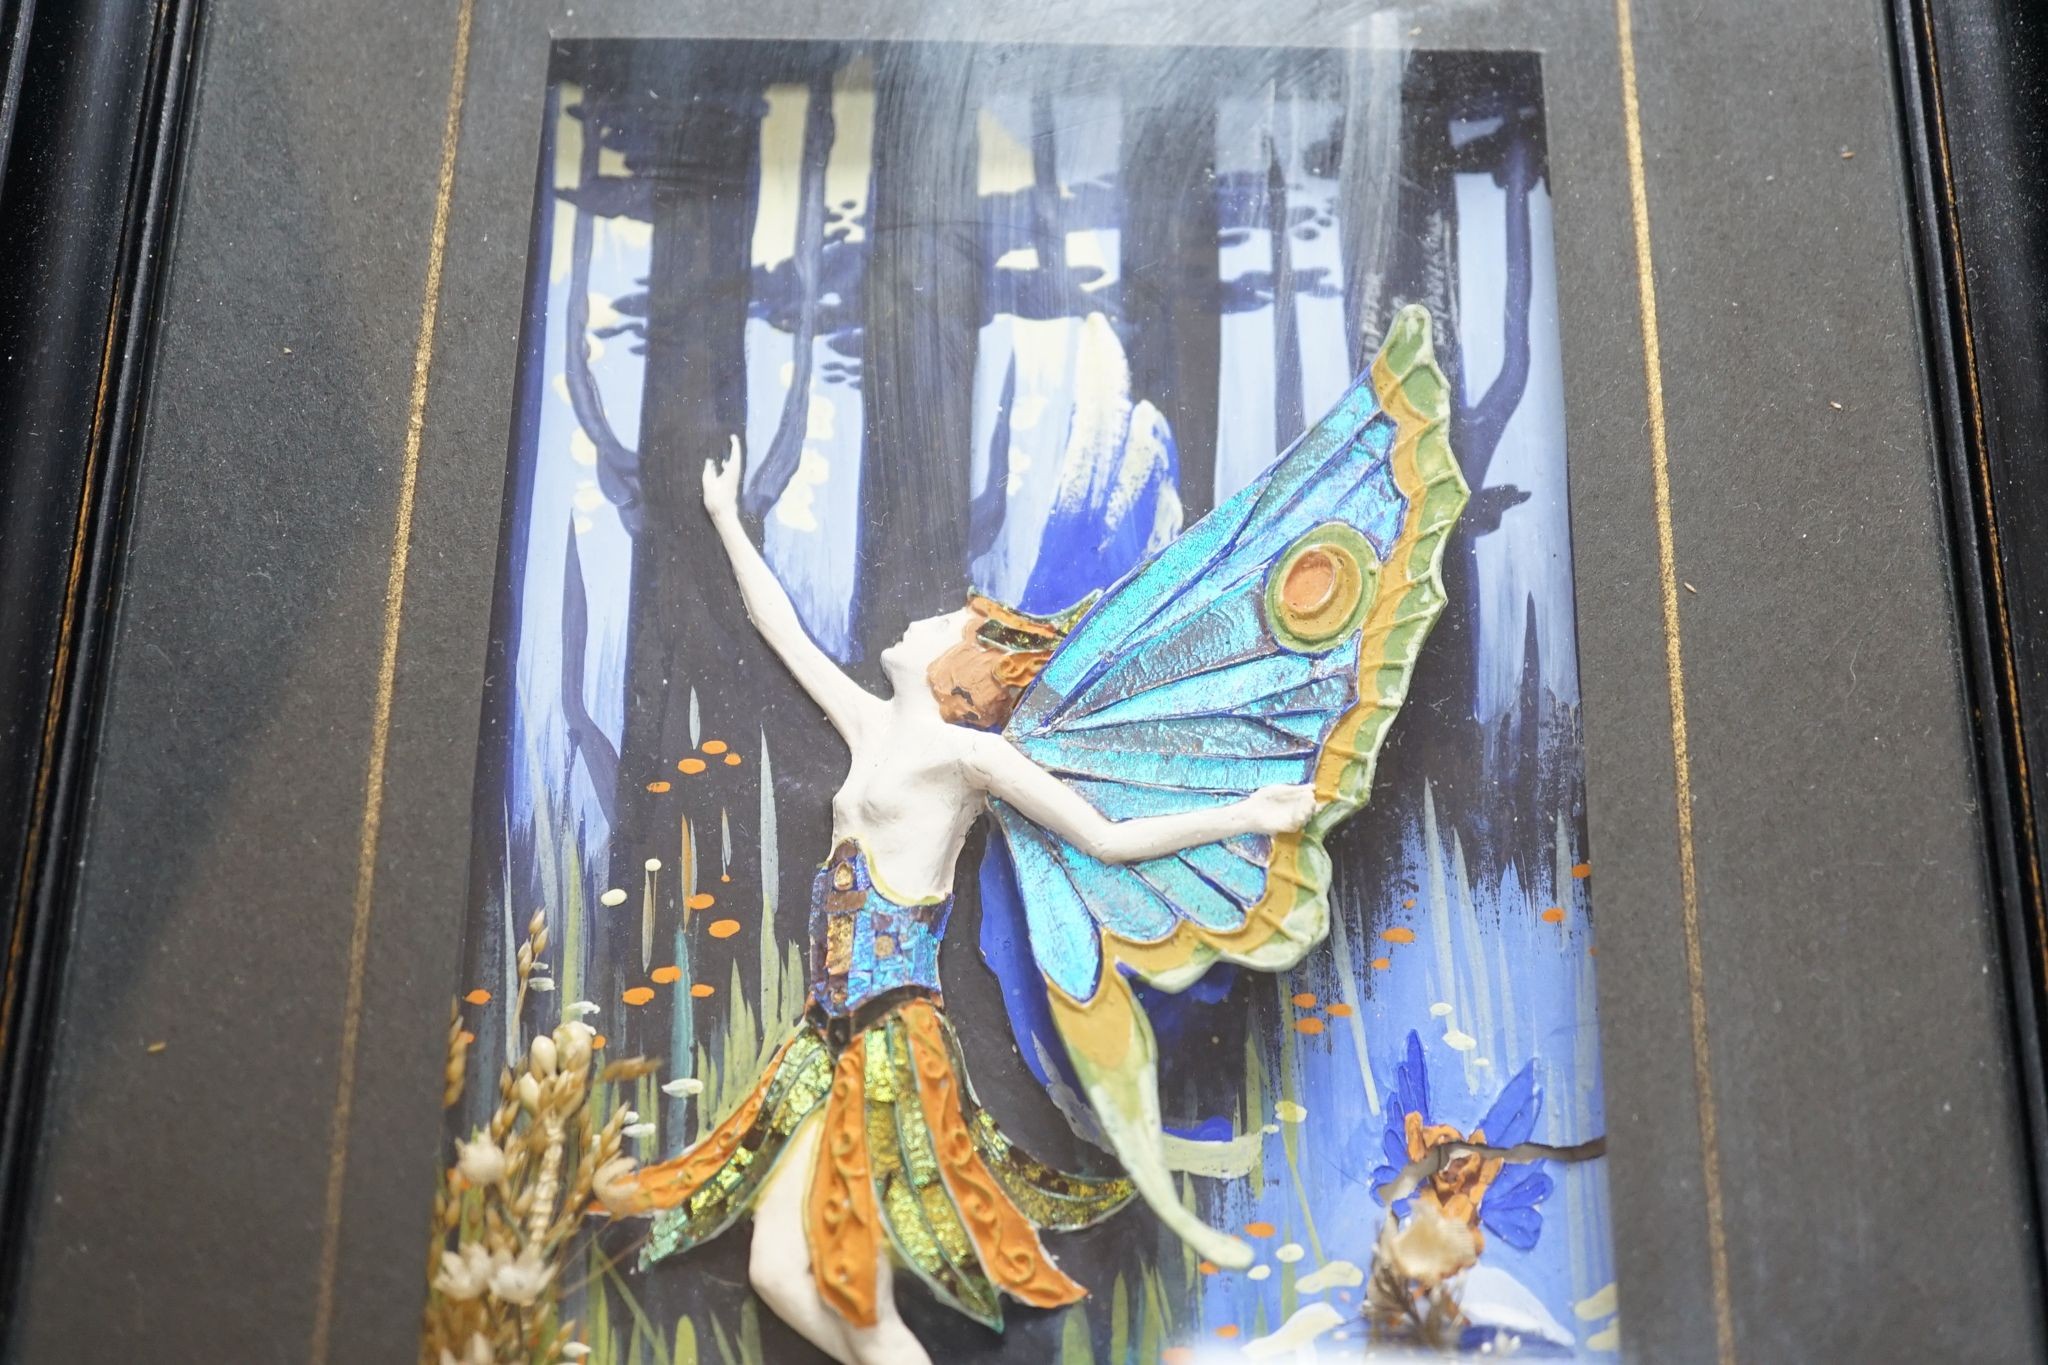 A pair of morpho butterfly wing nymph diorama, signed Gaydon King, Pat. App. For 19907/29, c. - Image 2 of 7